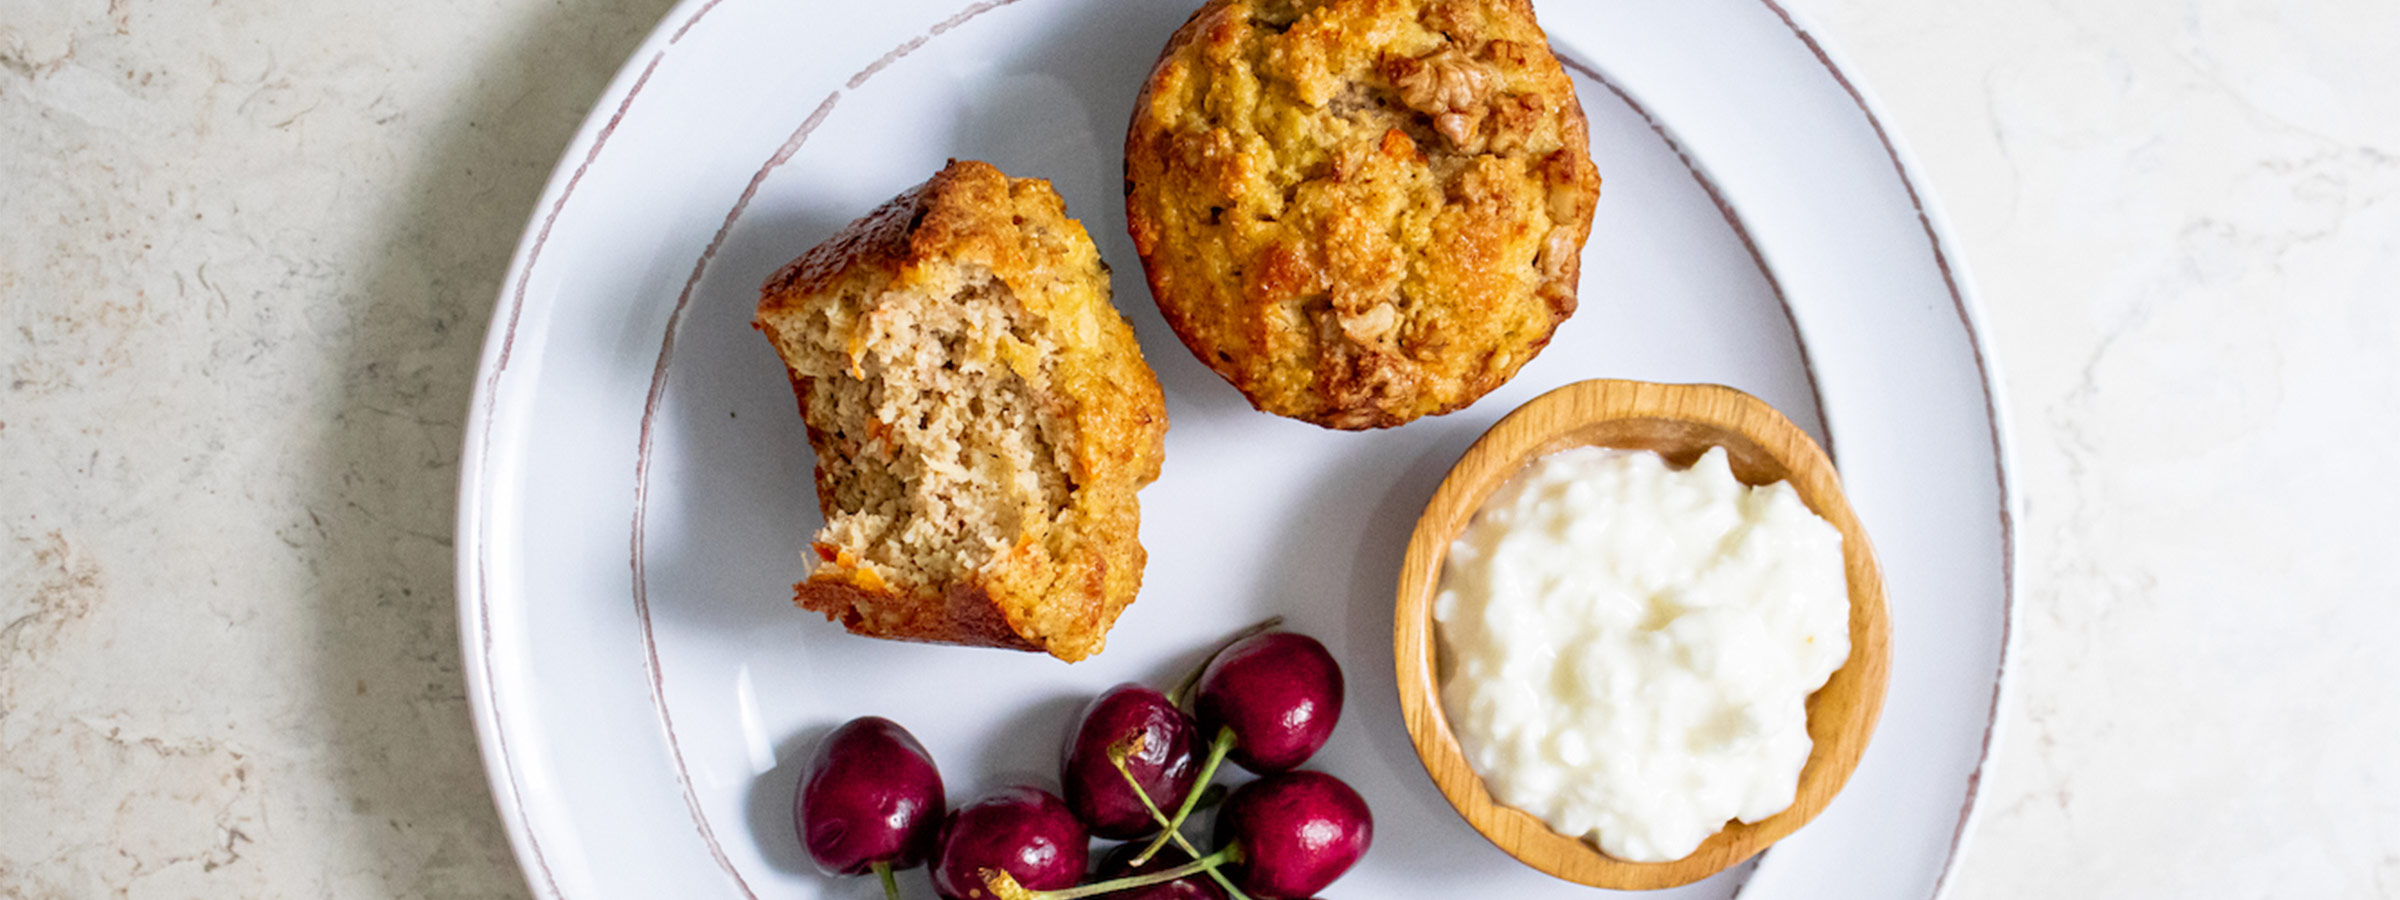 Morning Glory Muffins on a white plate with cherries